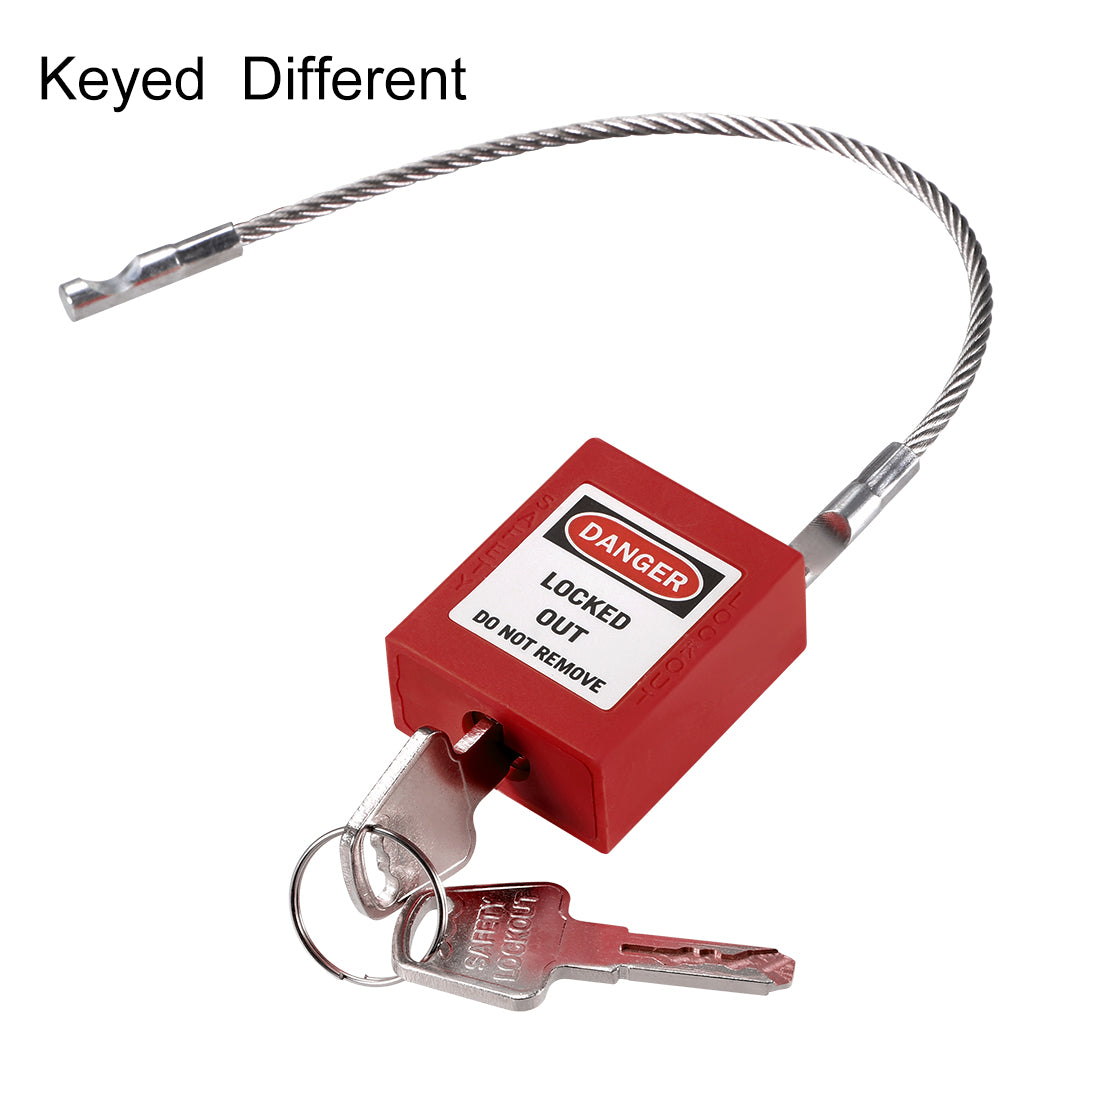 uxcell Uxcell Lockout Tagout Locks 3.3 Inch Shackle Key Different Safety Padlock Plastic Lock Red